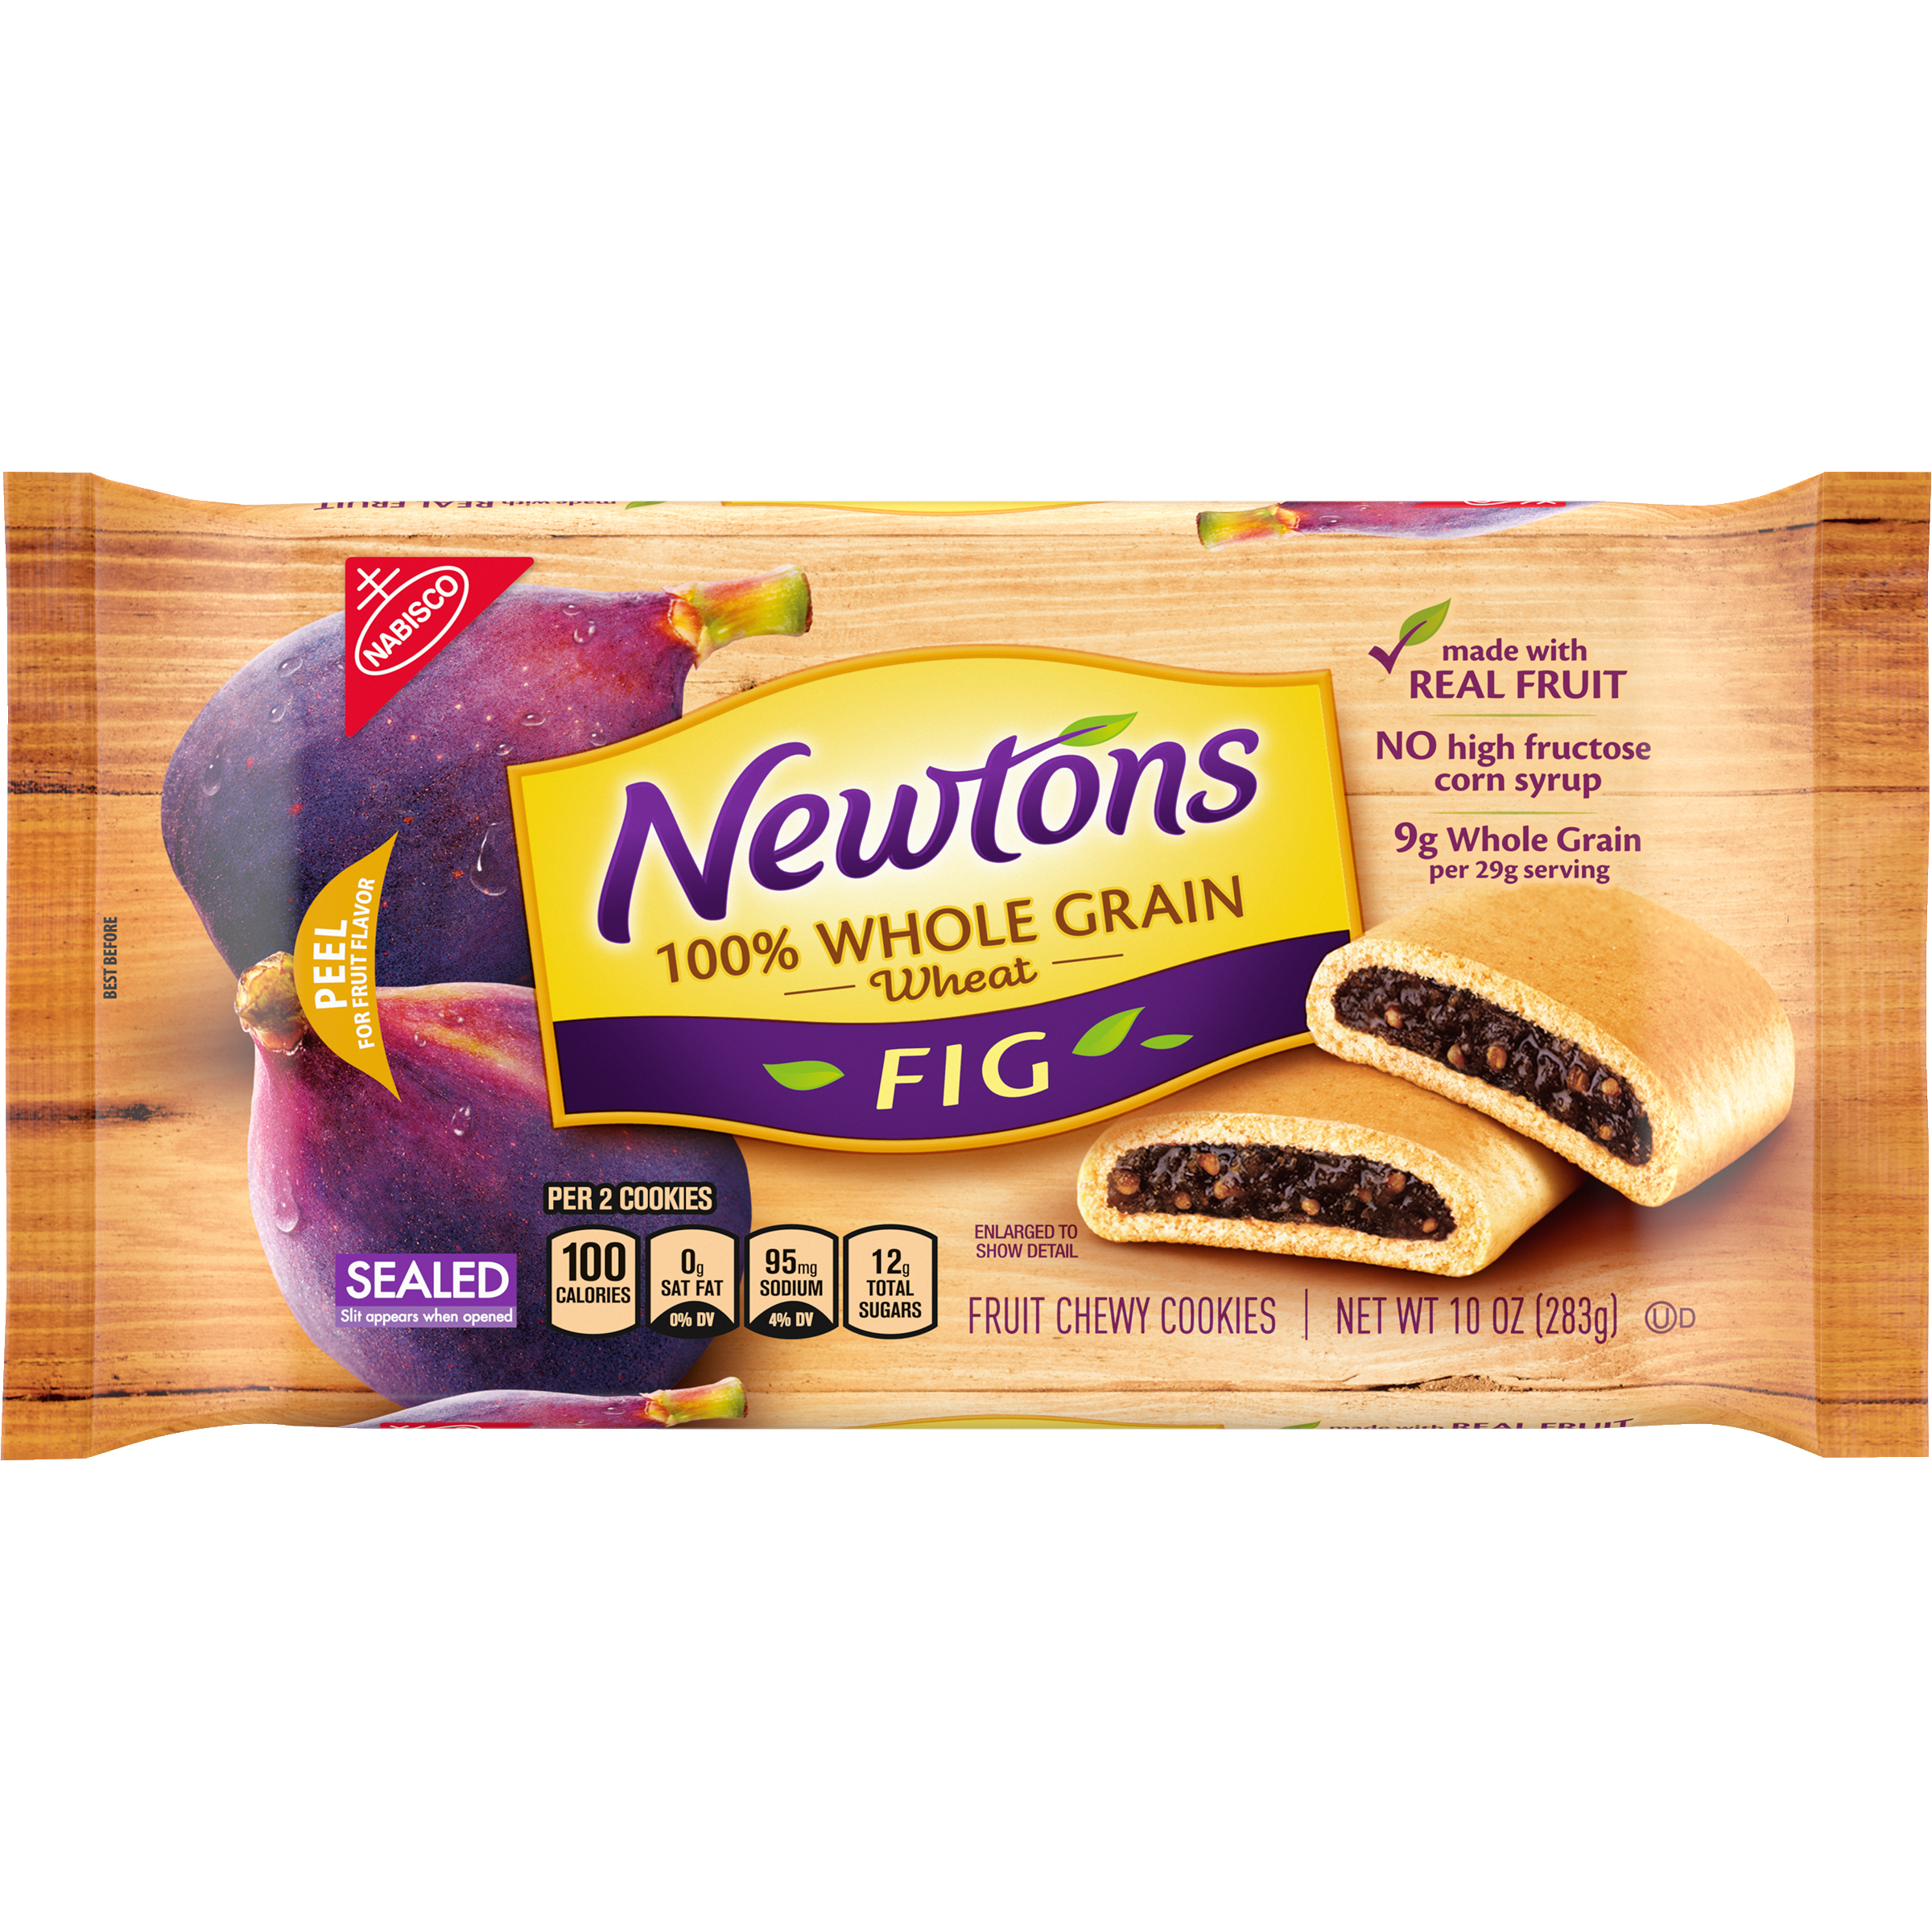 Newtons 100% Whole Grain Wheat Soft & Fruit Chewy Fig Cookies, 10 oz Pack-1